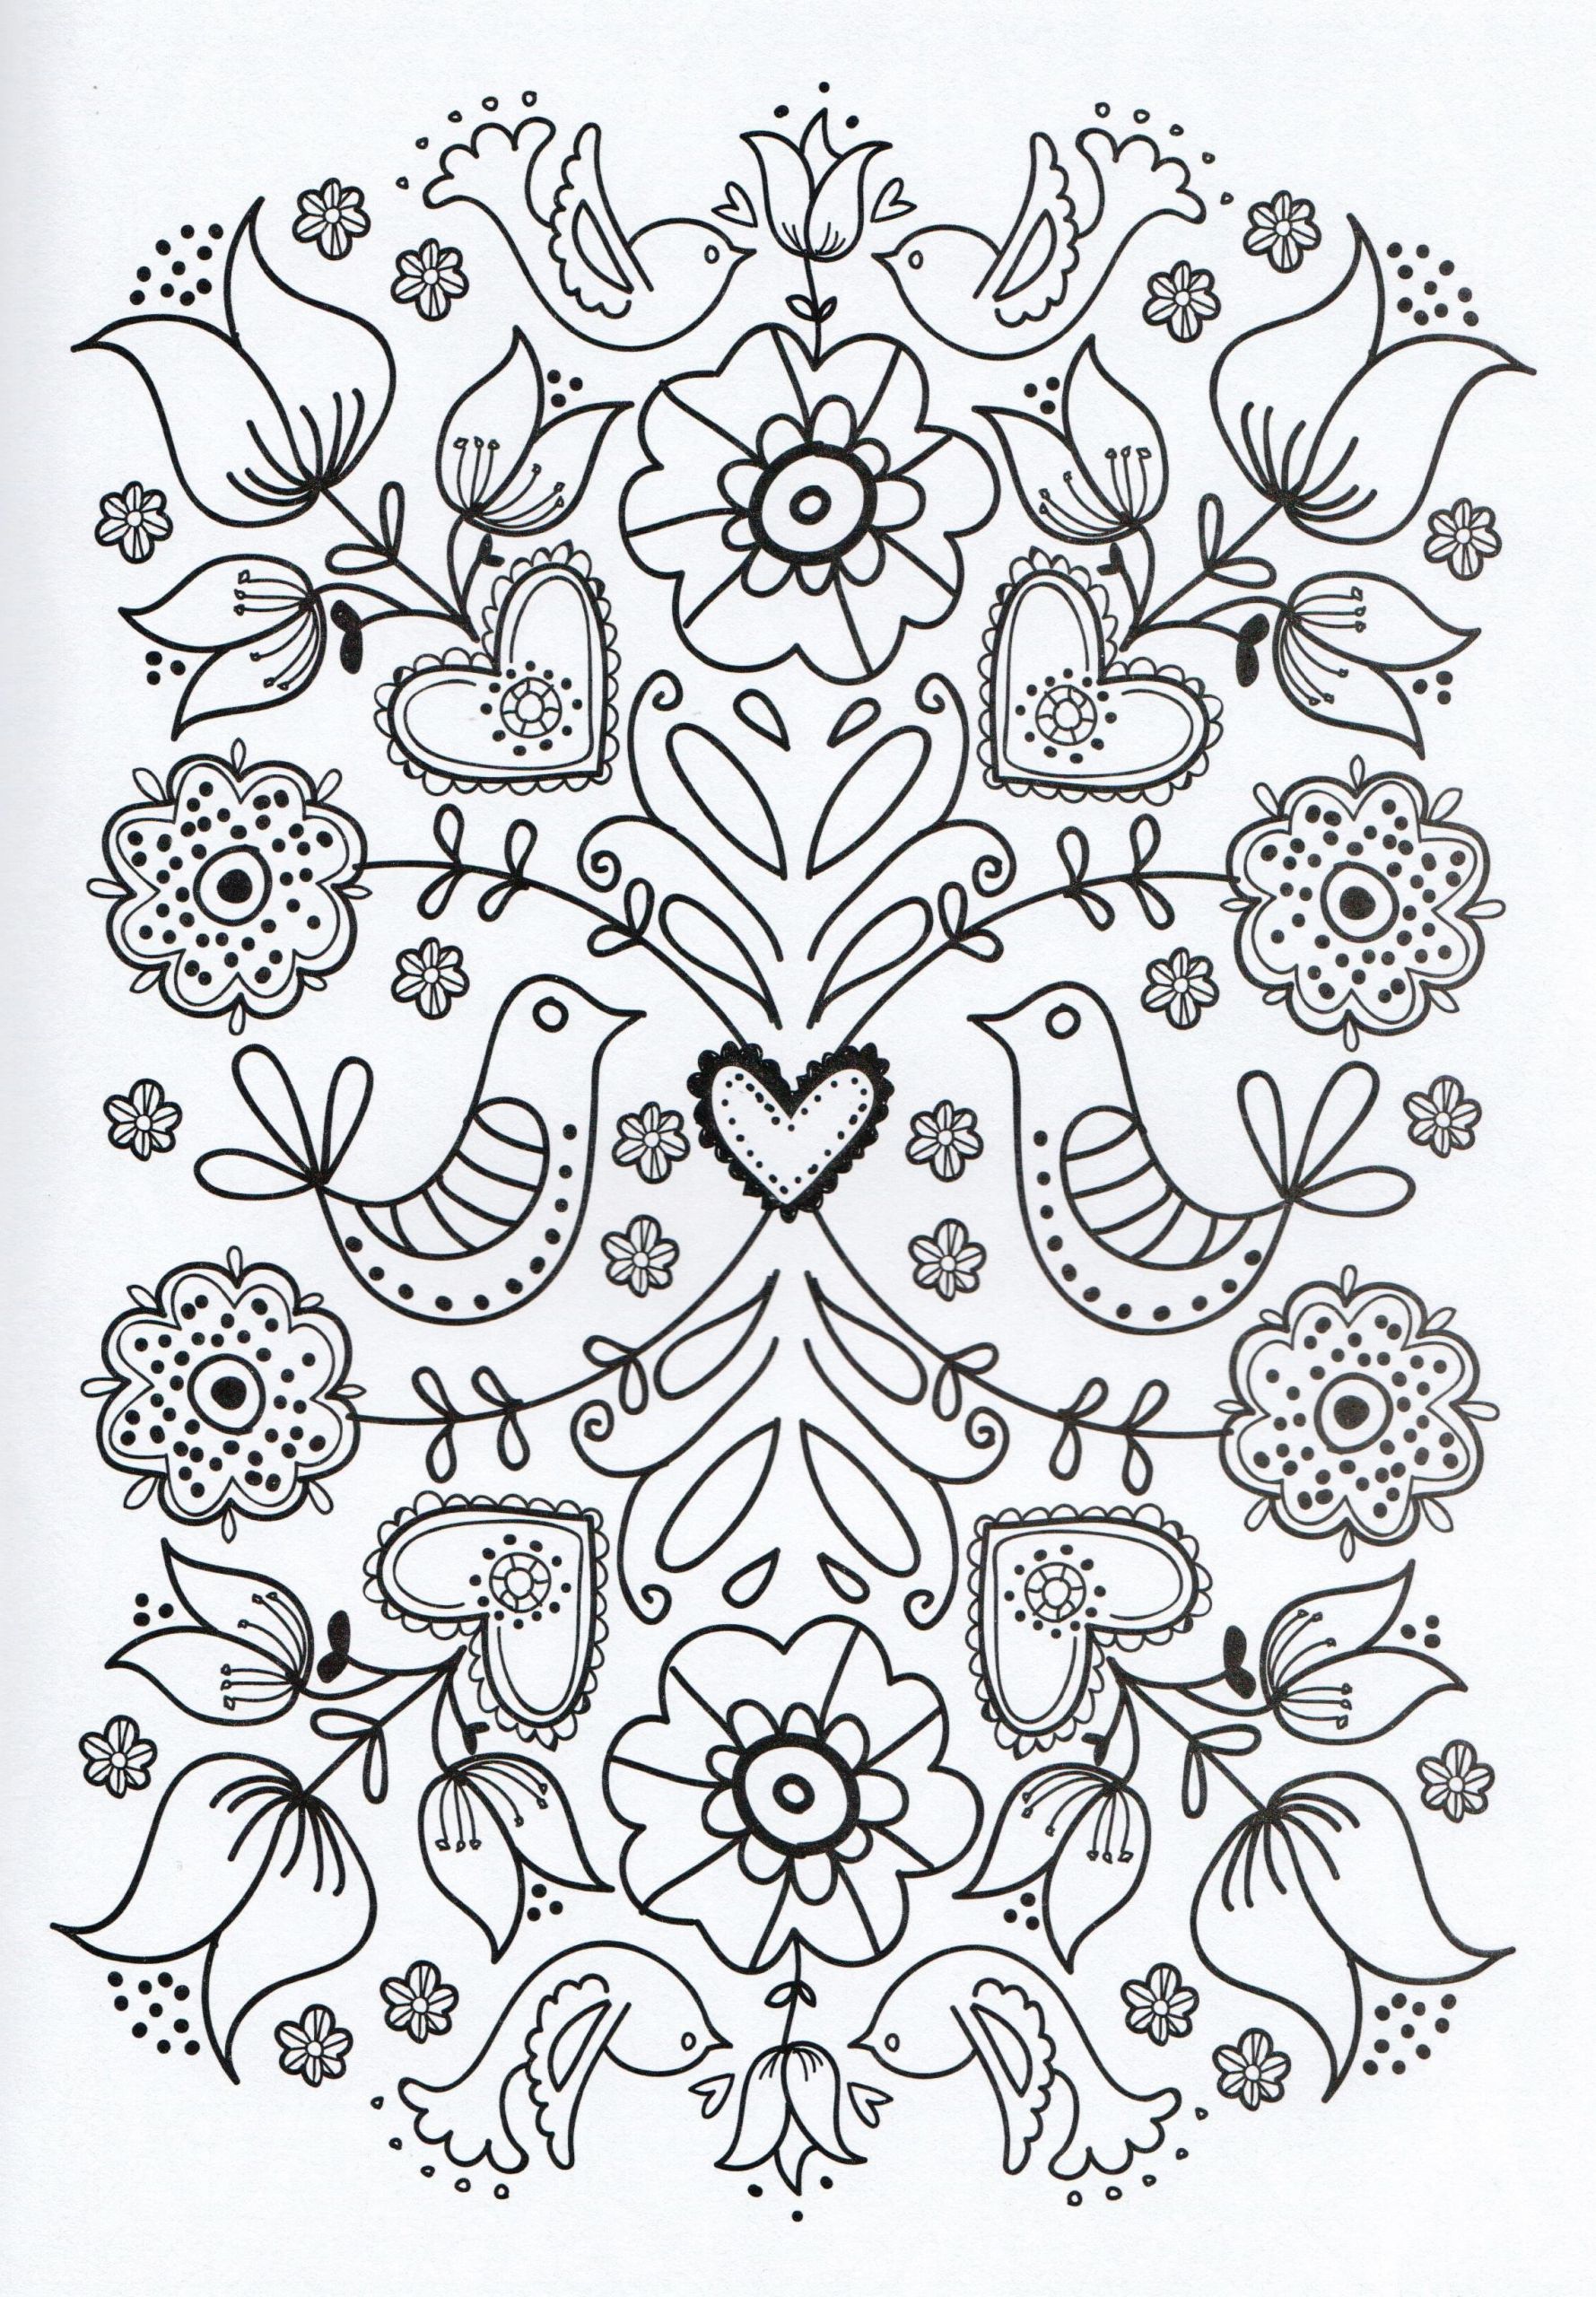 Simple Adult Coloring Books
 10 Simple & Useful Mother’s Day Gifts to DIY or Buy